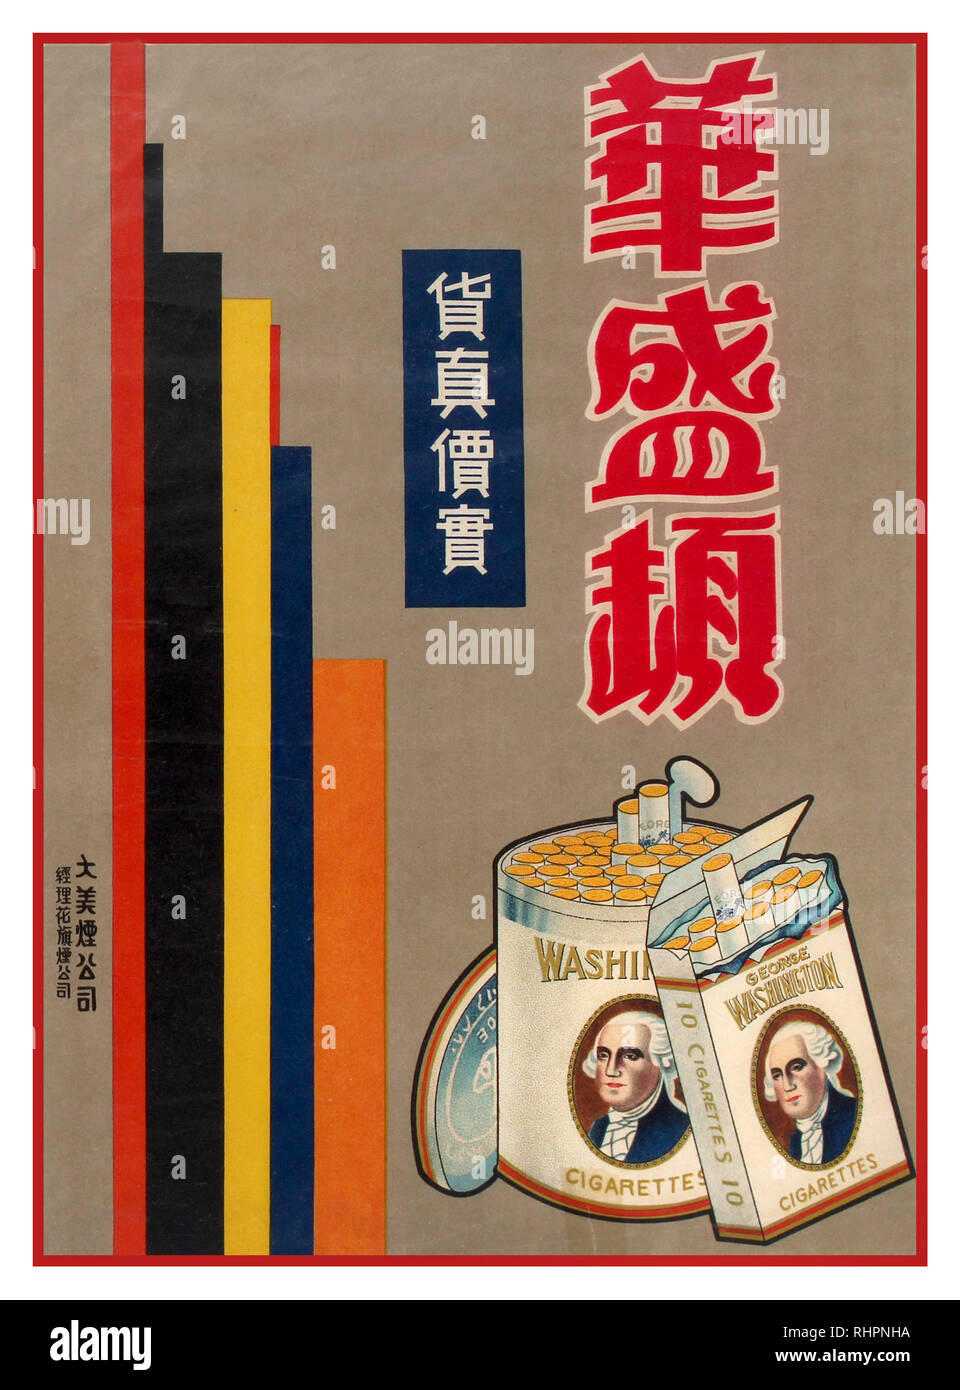 vintage Art Deco Chinese advertising poster for a brand of cigarettes George Washington. The brand was owned by BAT. British American Tobacco.China.1920s. Stock Photo